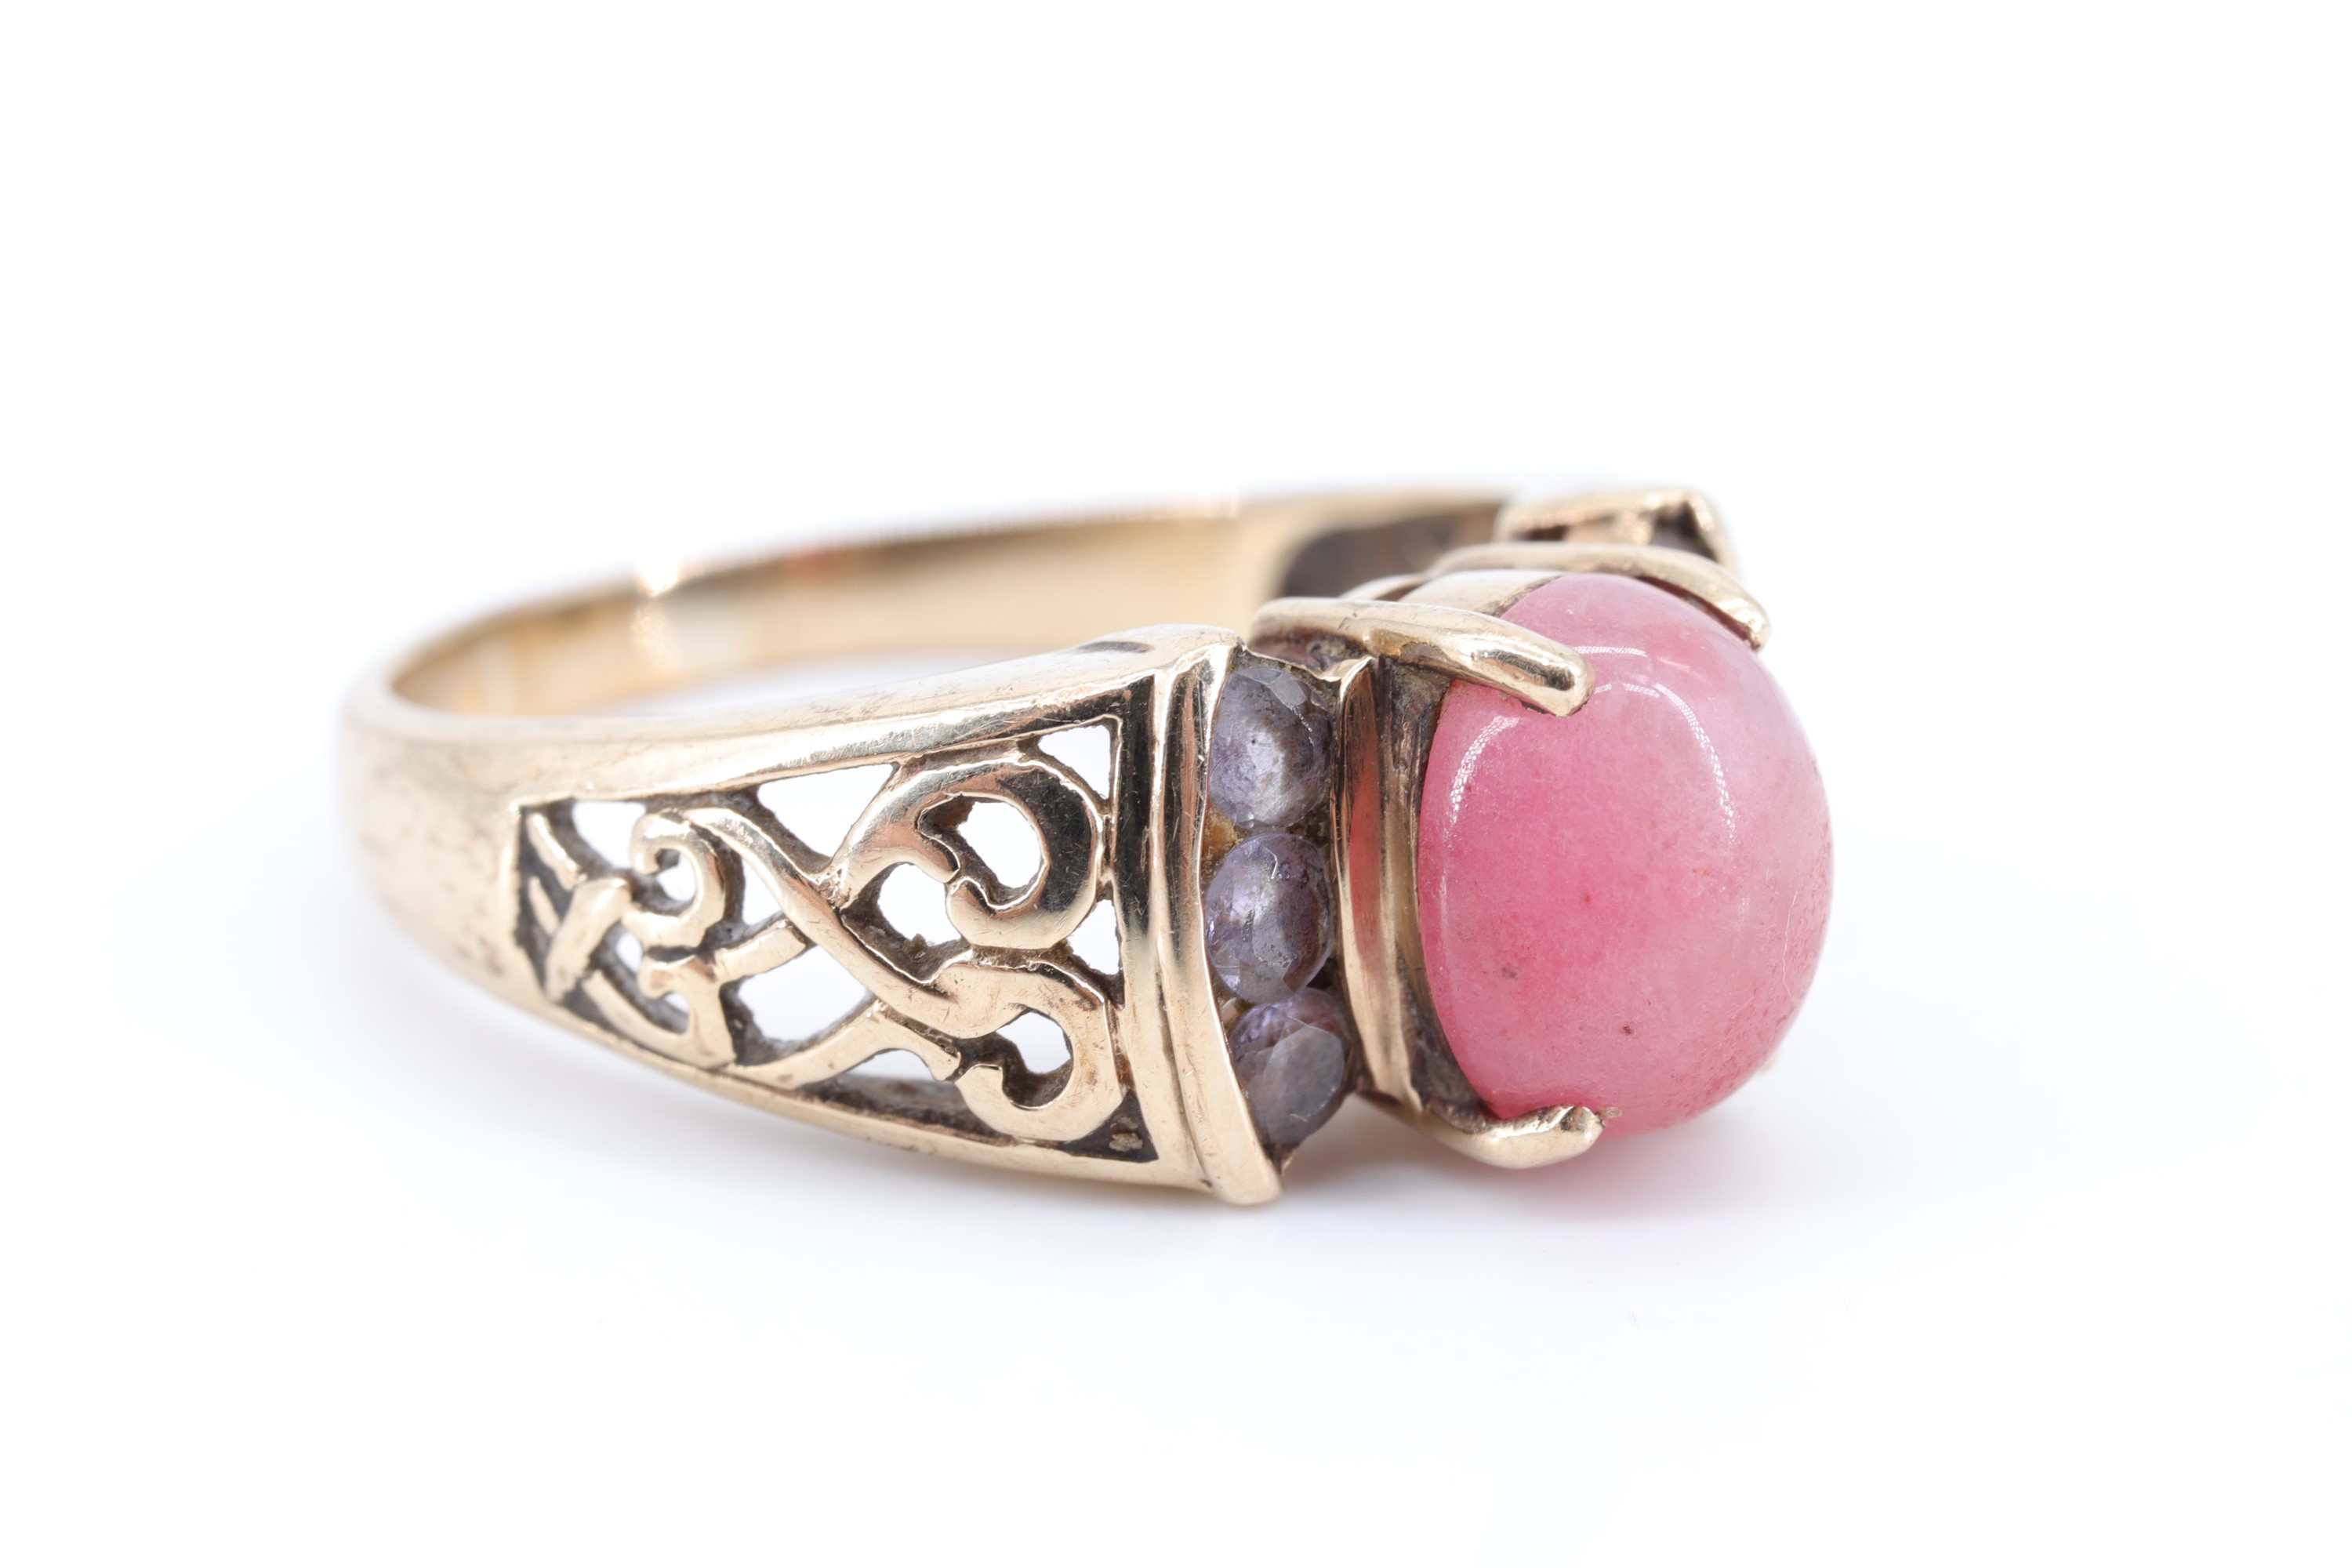 An unusual chalcedony and 9 ct gold dress ring, having an oval chalcedony cabochon transverse set in - Image 2 of 4